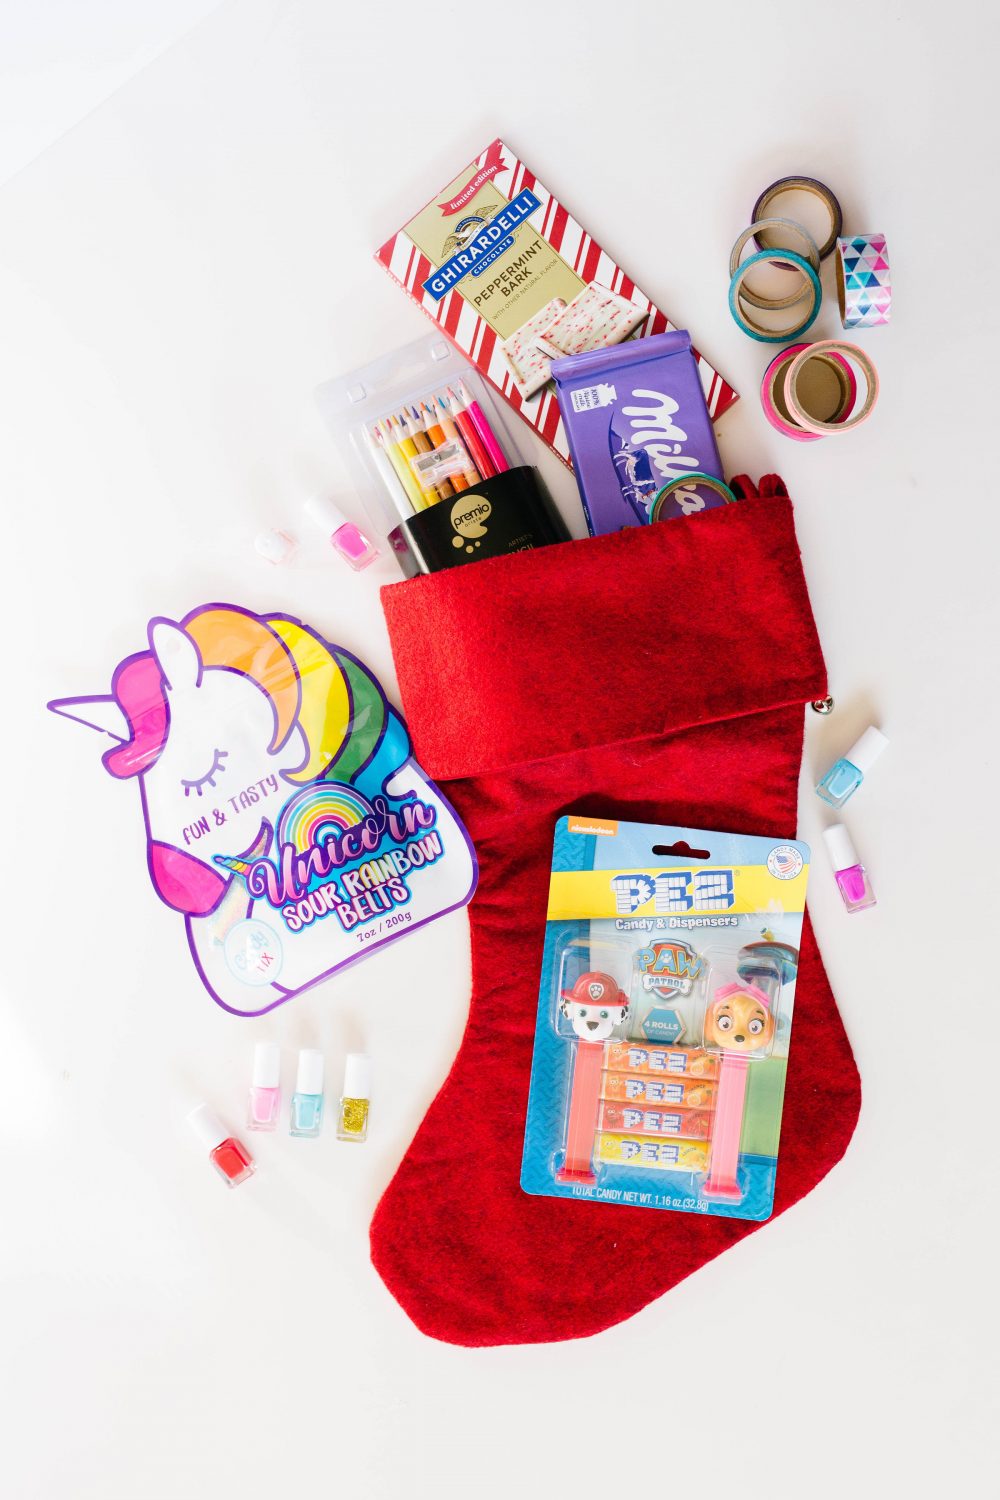 How We Do Stocking Stuffers for Kids - Everyday Reading